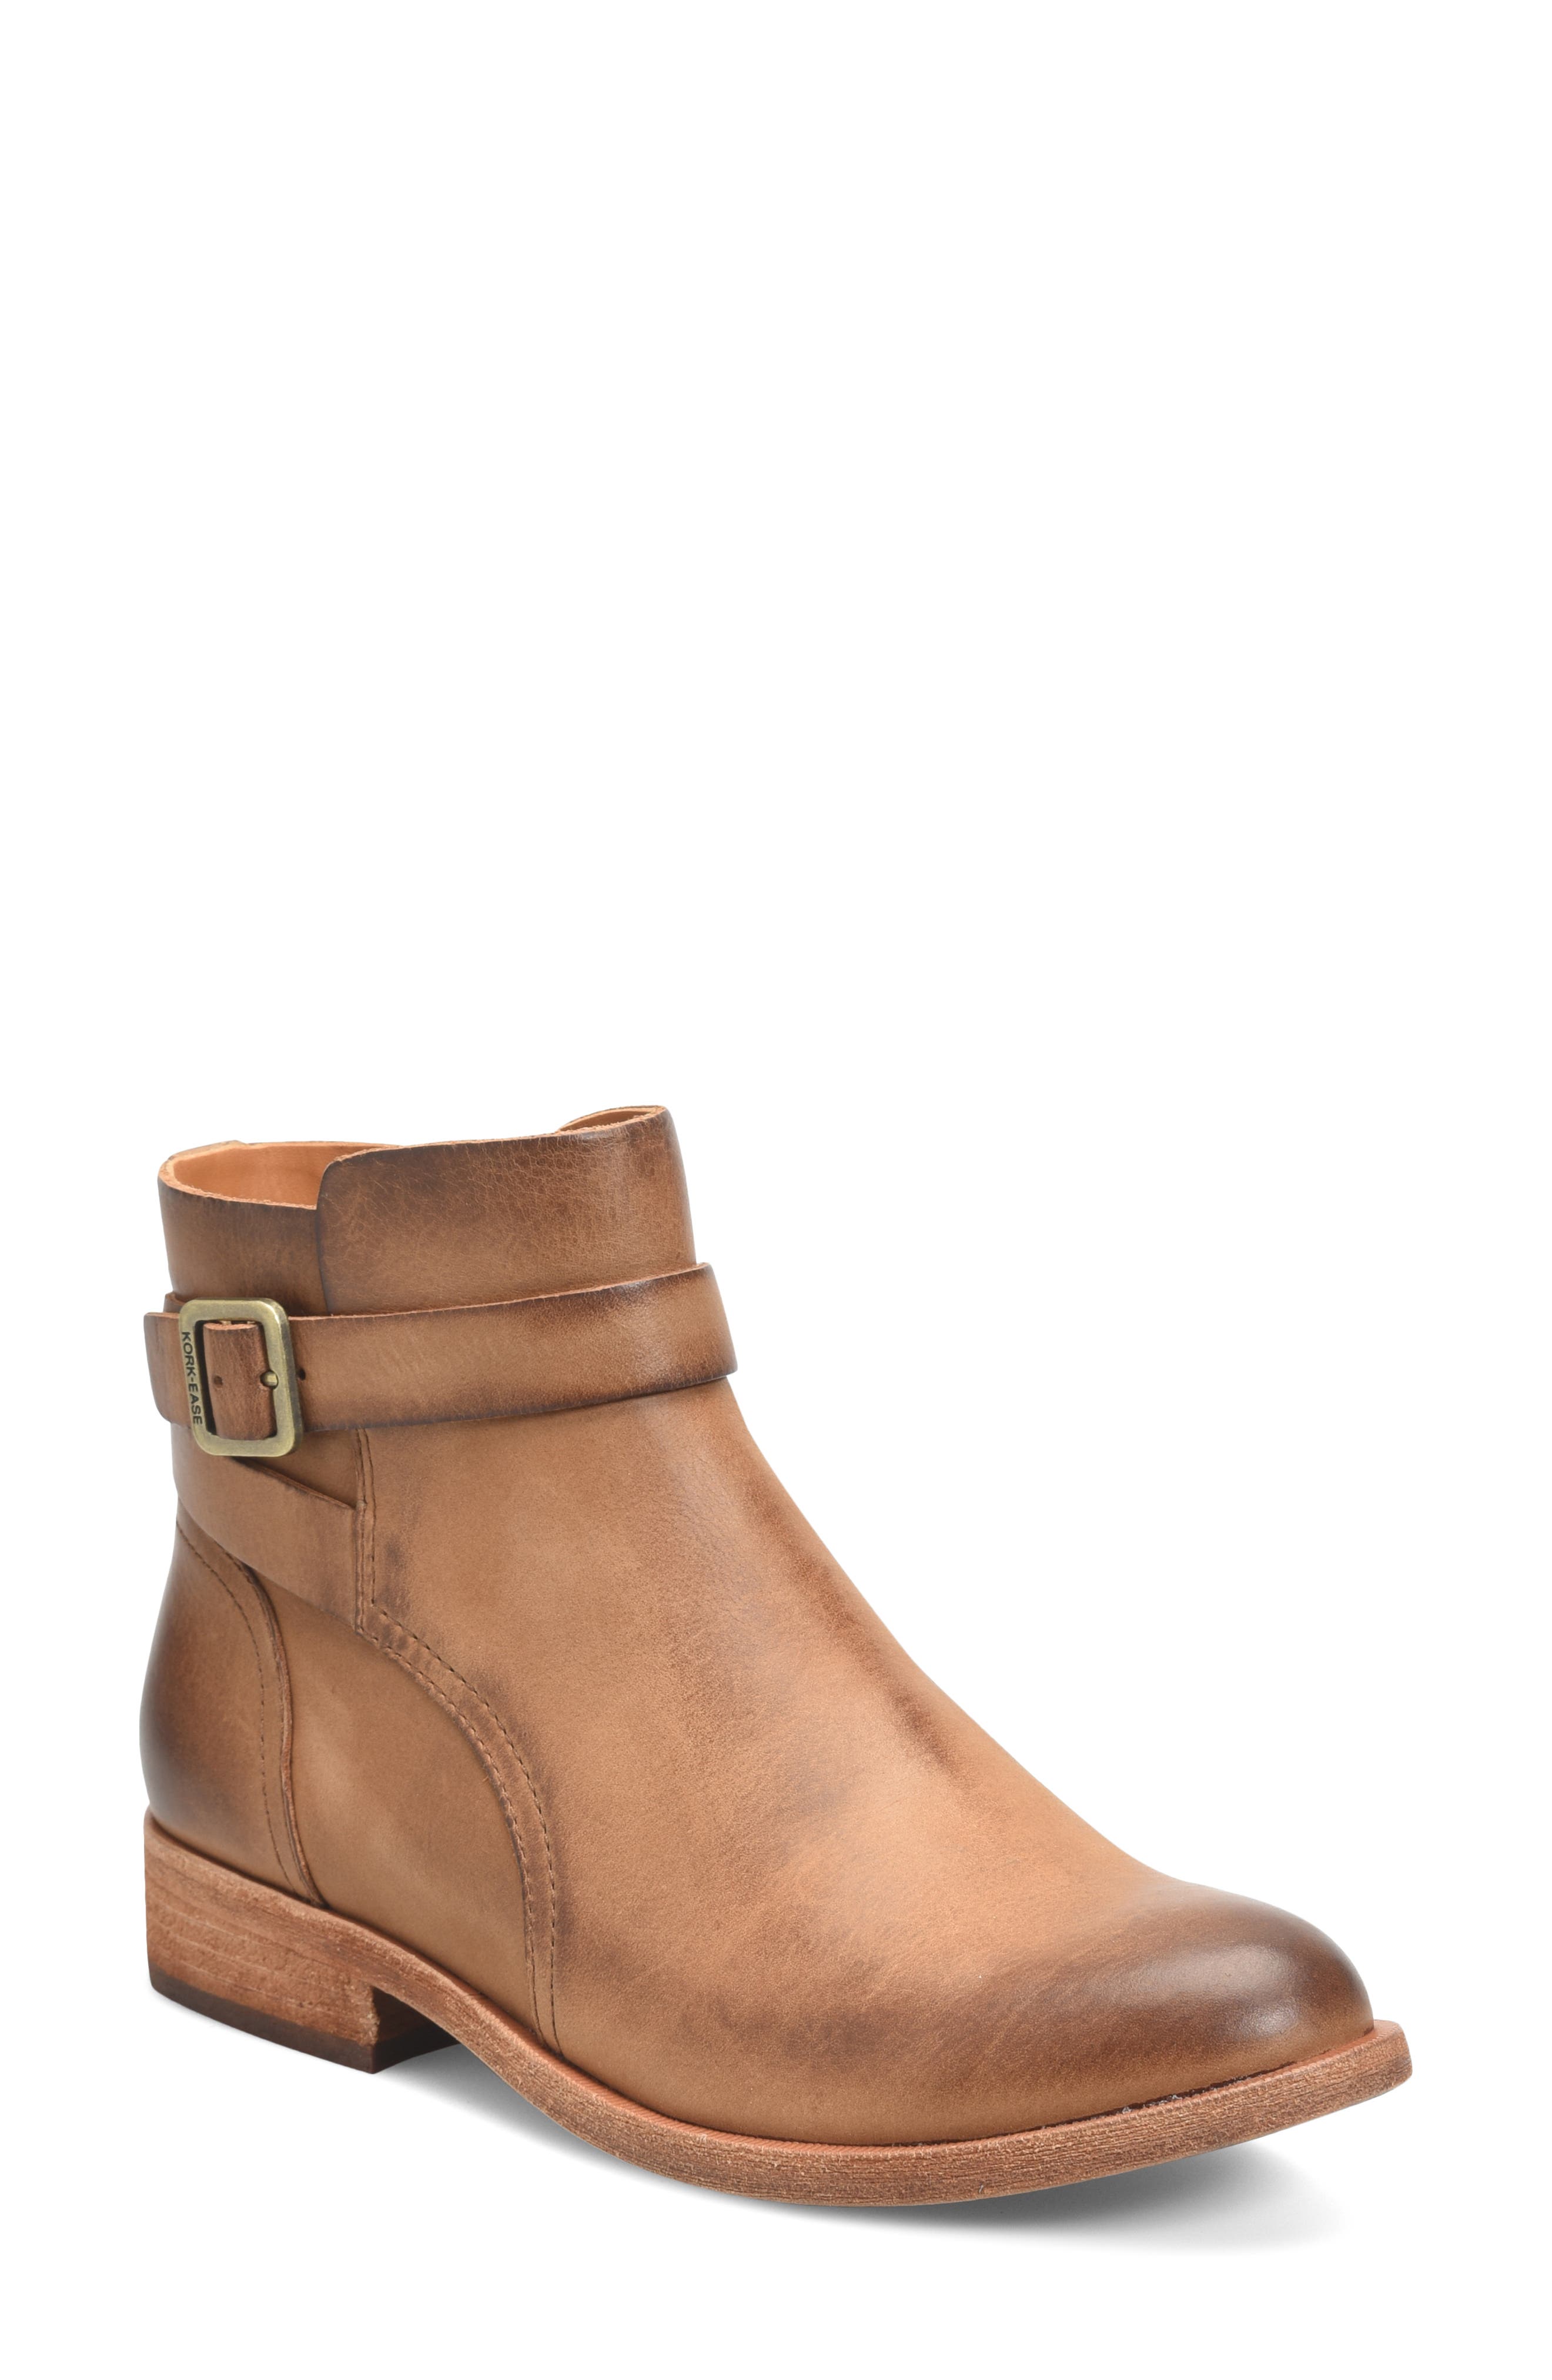 leather boots | Nordstrom